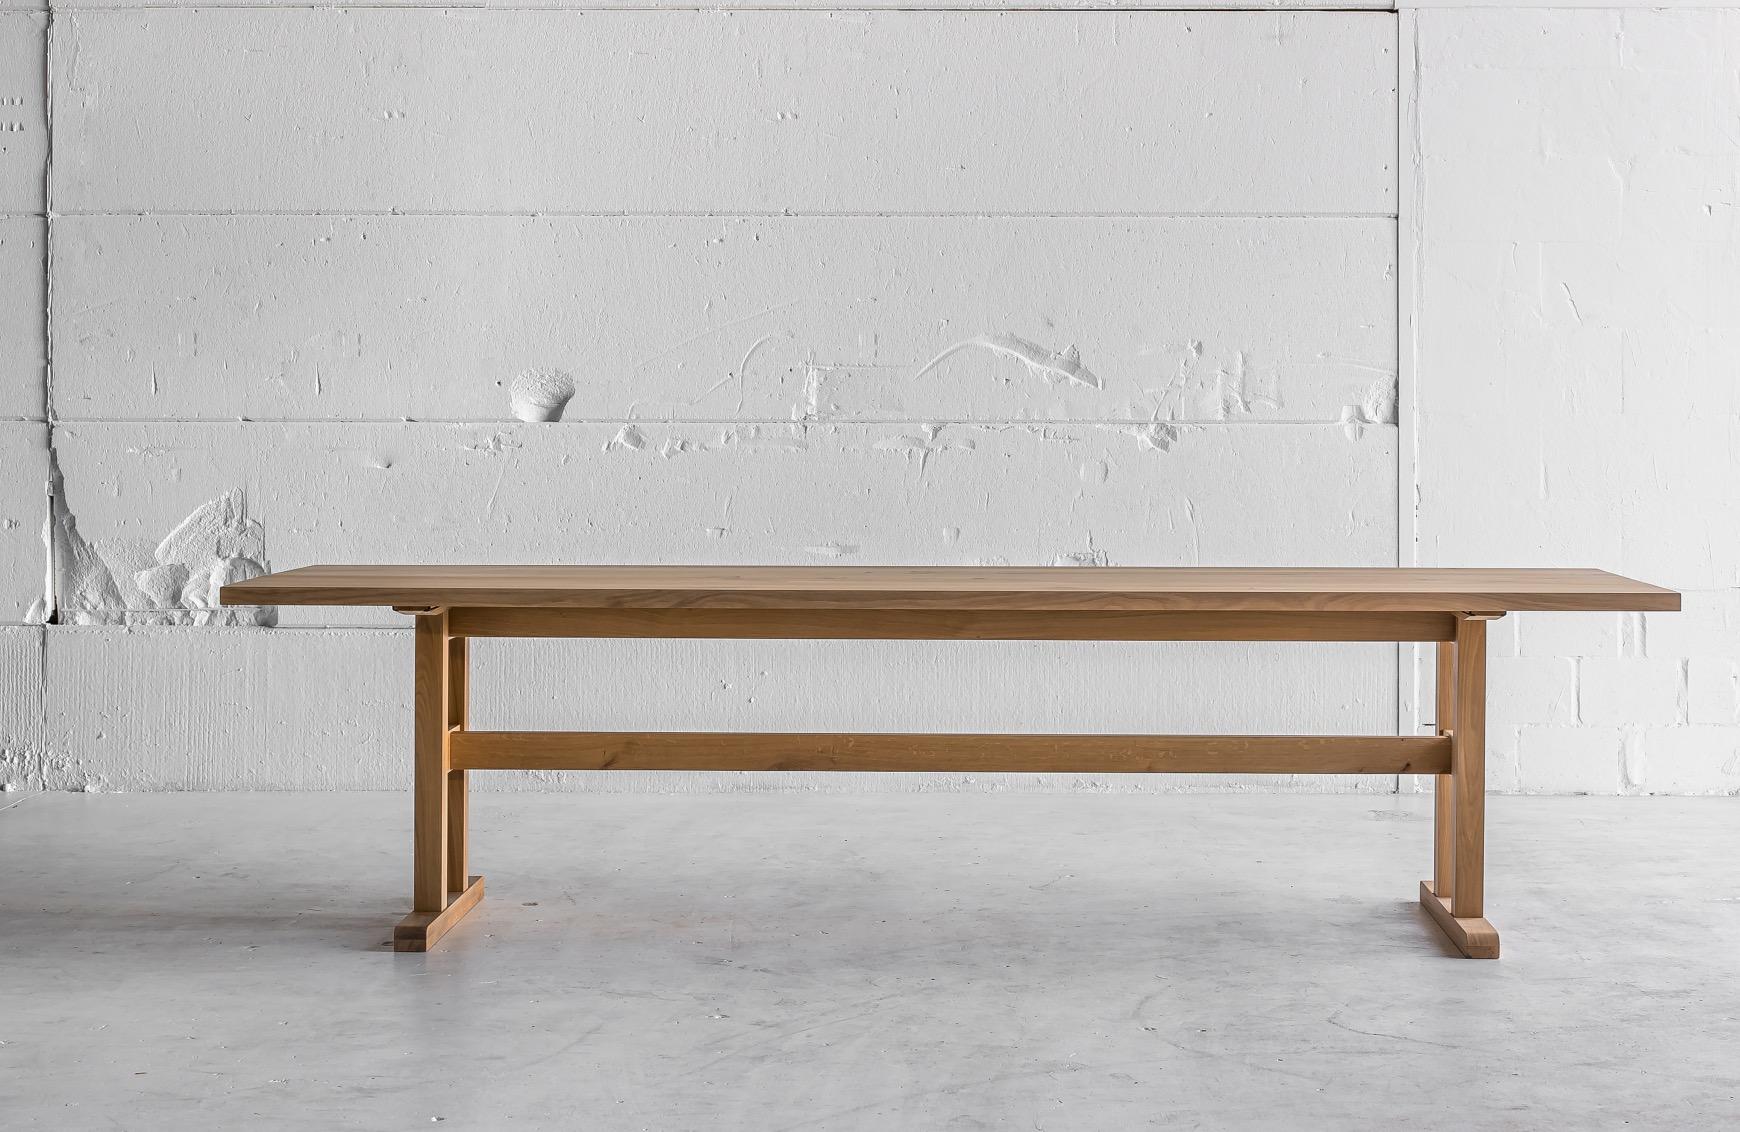 IN STOCK AND AVAILABLE NOW.
Solid Oak Belgian dining table featuring a modern design, clean shapes and a sculptural base. This traditional Belgian table is handmade from long-lasting french oak. A table to grow old with and share stories around. It